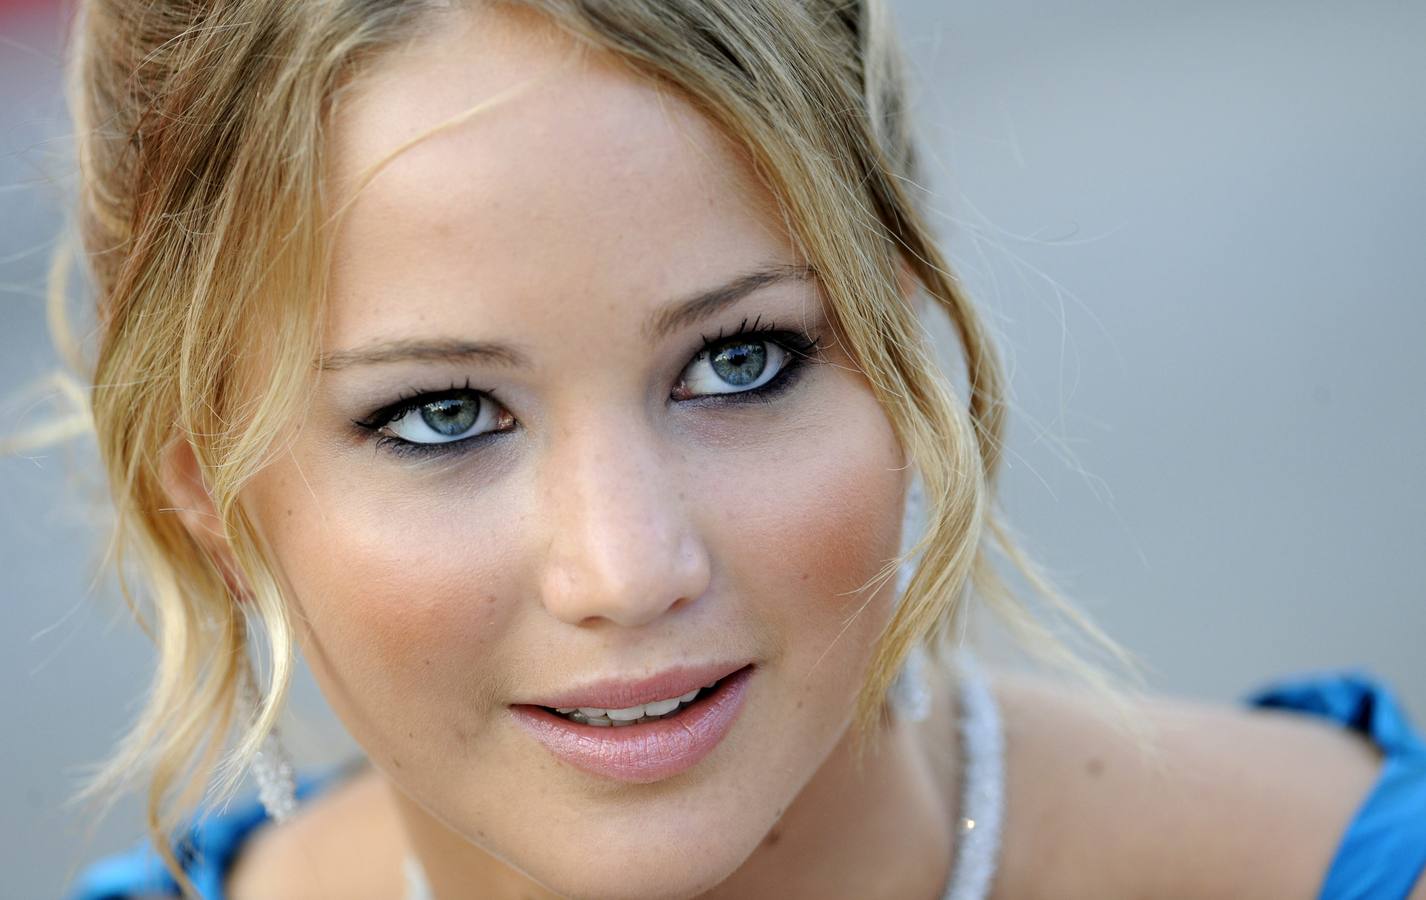 US actress  Jennifer Lawrence poses before the screening of the movie "The Burning Plain" directed by Mexican Guillermo Arriaga during the 65th Venice International Film Festival at Venice Lido, on August 29, 2008. "The Burning Plain" is presented in competition for the Golden Lion Award.  AFP PHOTO / DAMIEN MEYER